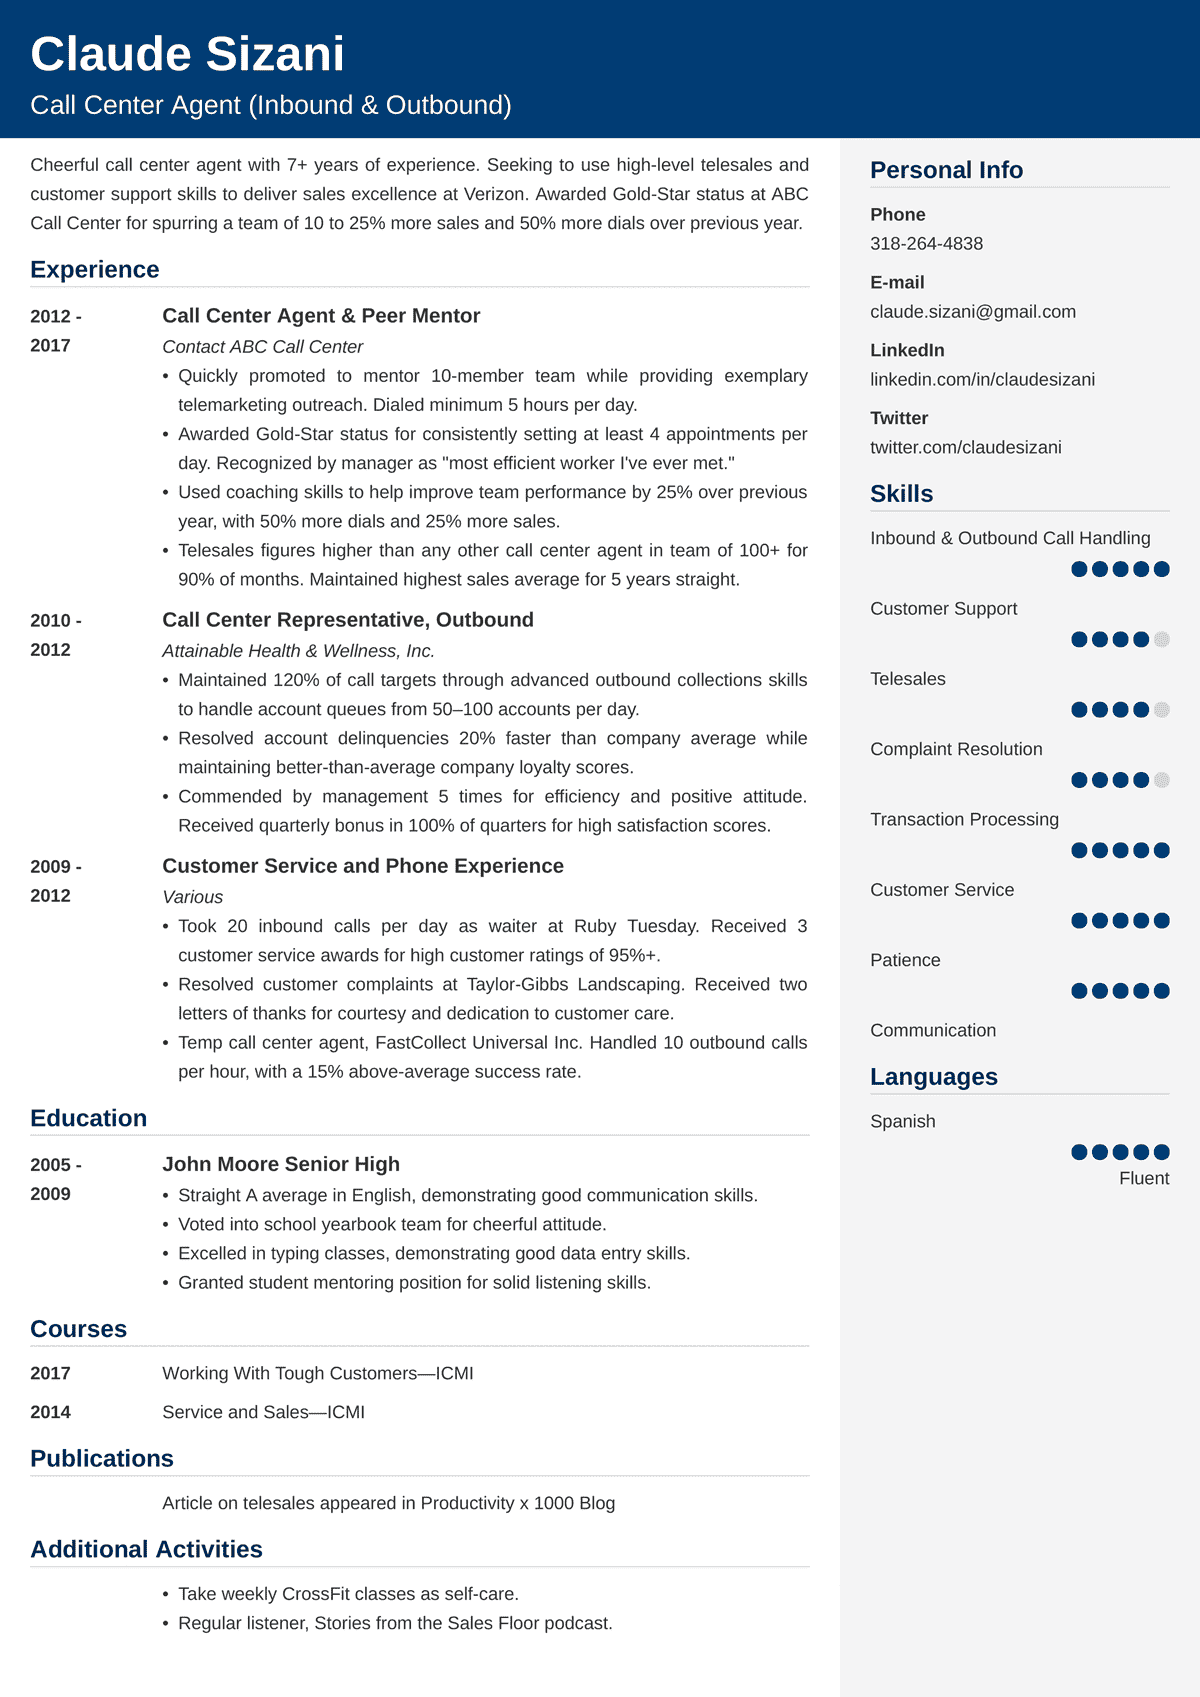 Call Center Resume Sample—25+ Examples and Writing Tips